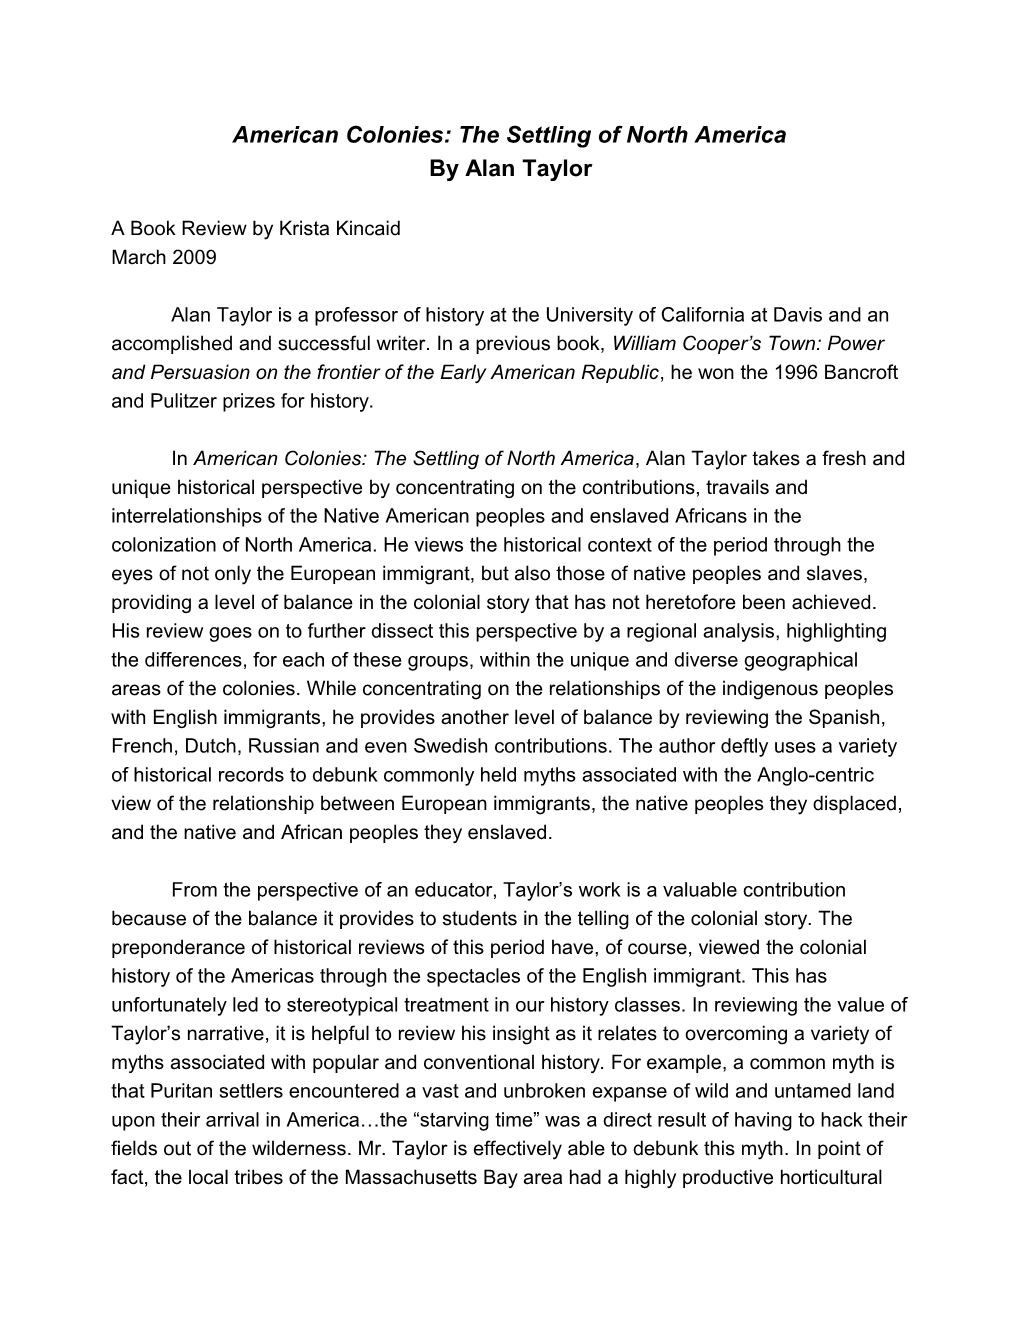 American Colonies: the Settling of North America, by Alan Taylor